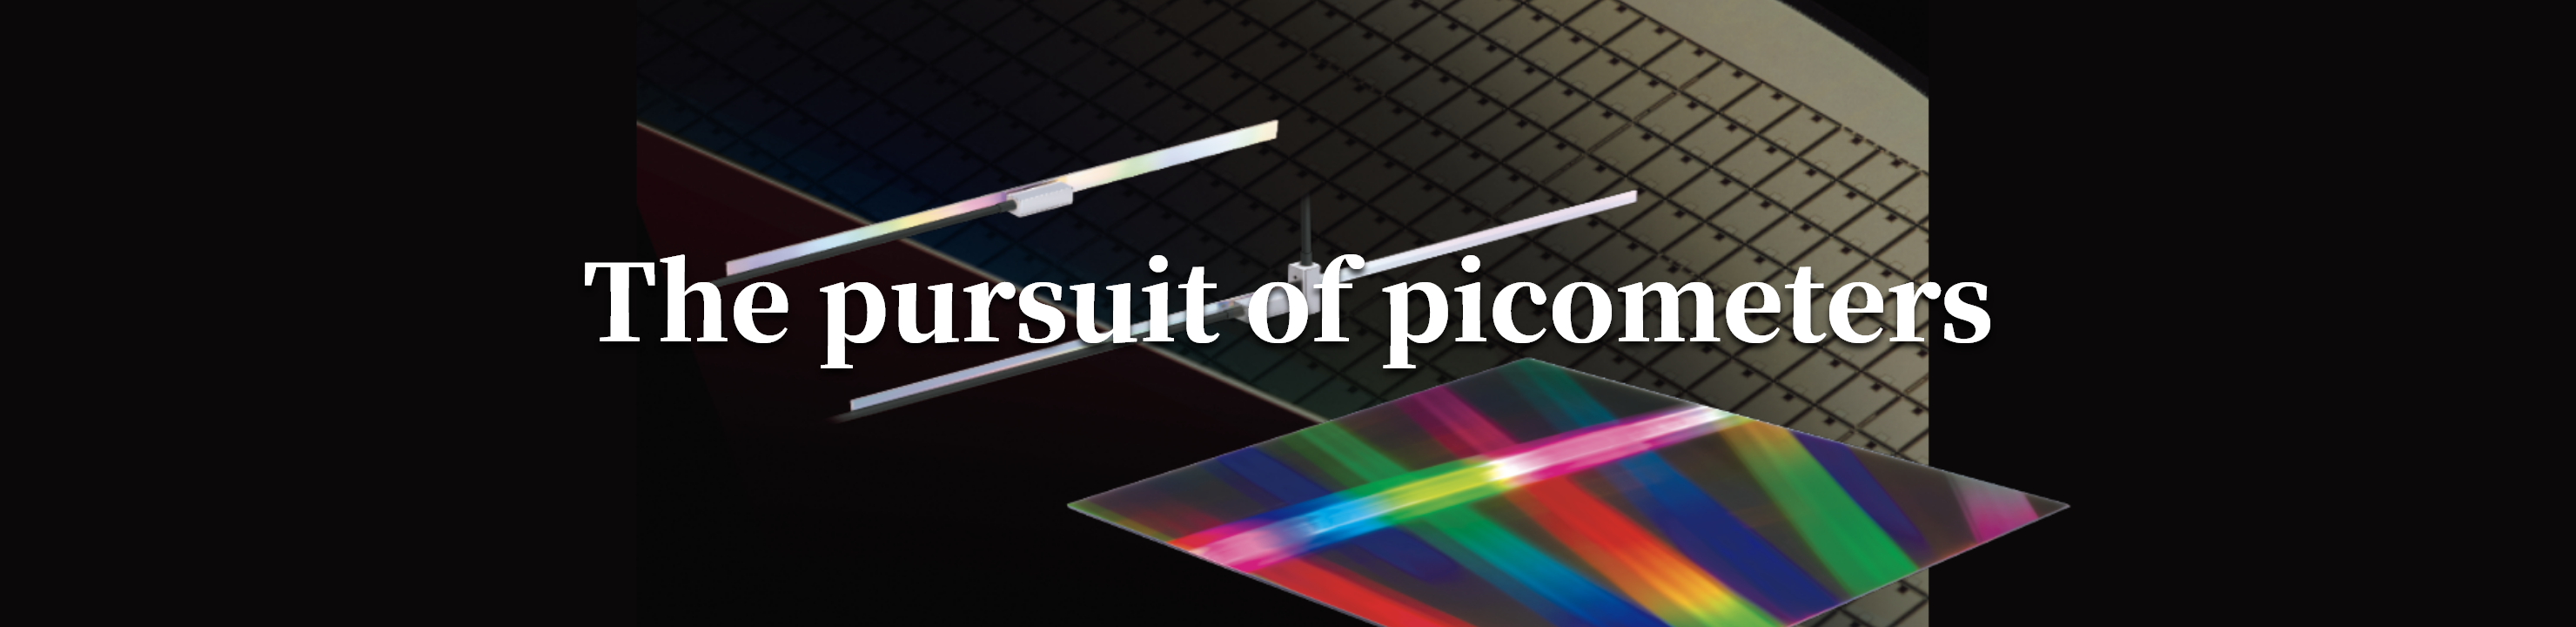 The pursuit of pictometer